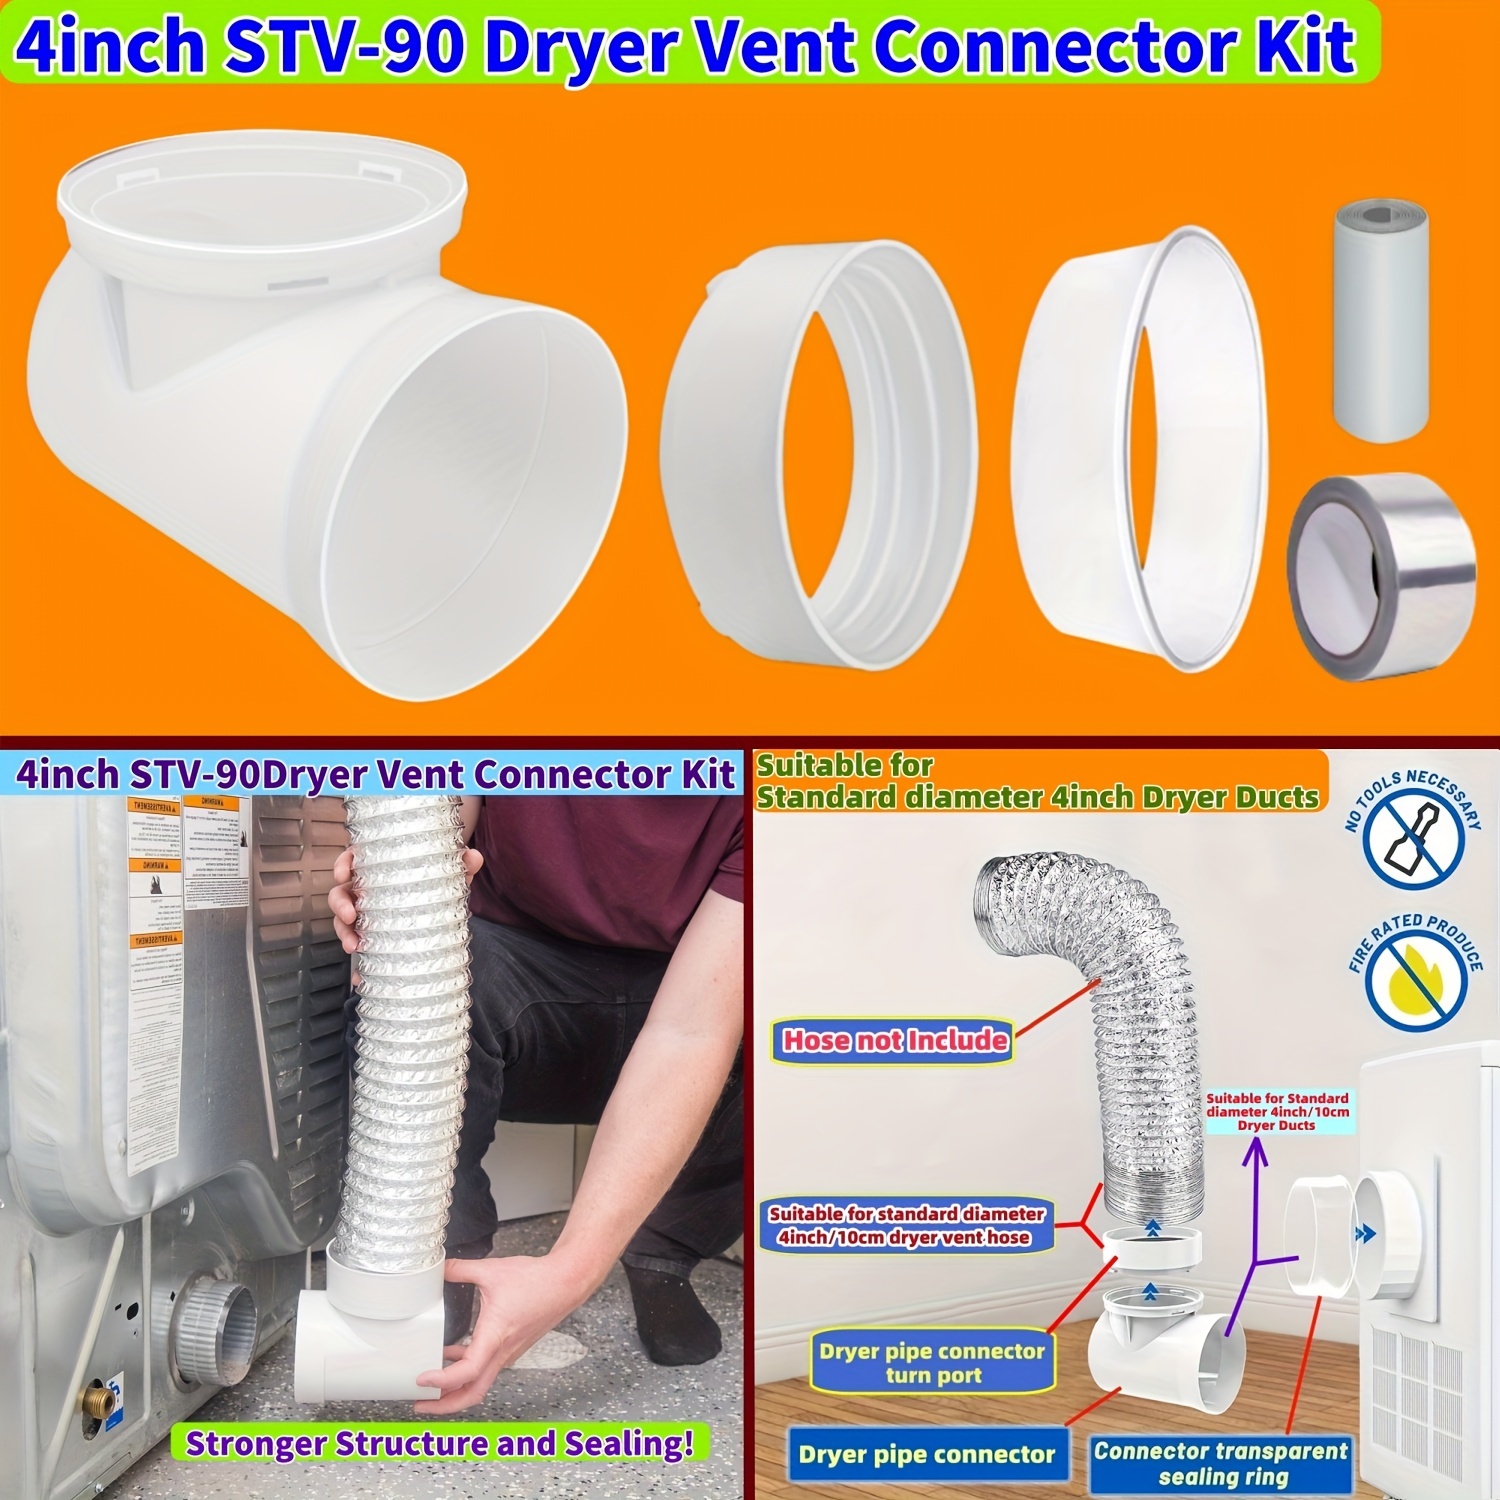 

Upgraded 4-inch Dryer Vent Kit With Secure Mounting Bracket And Stv-90 Connector - Perfect For Standard Laundry Ducts